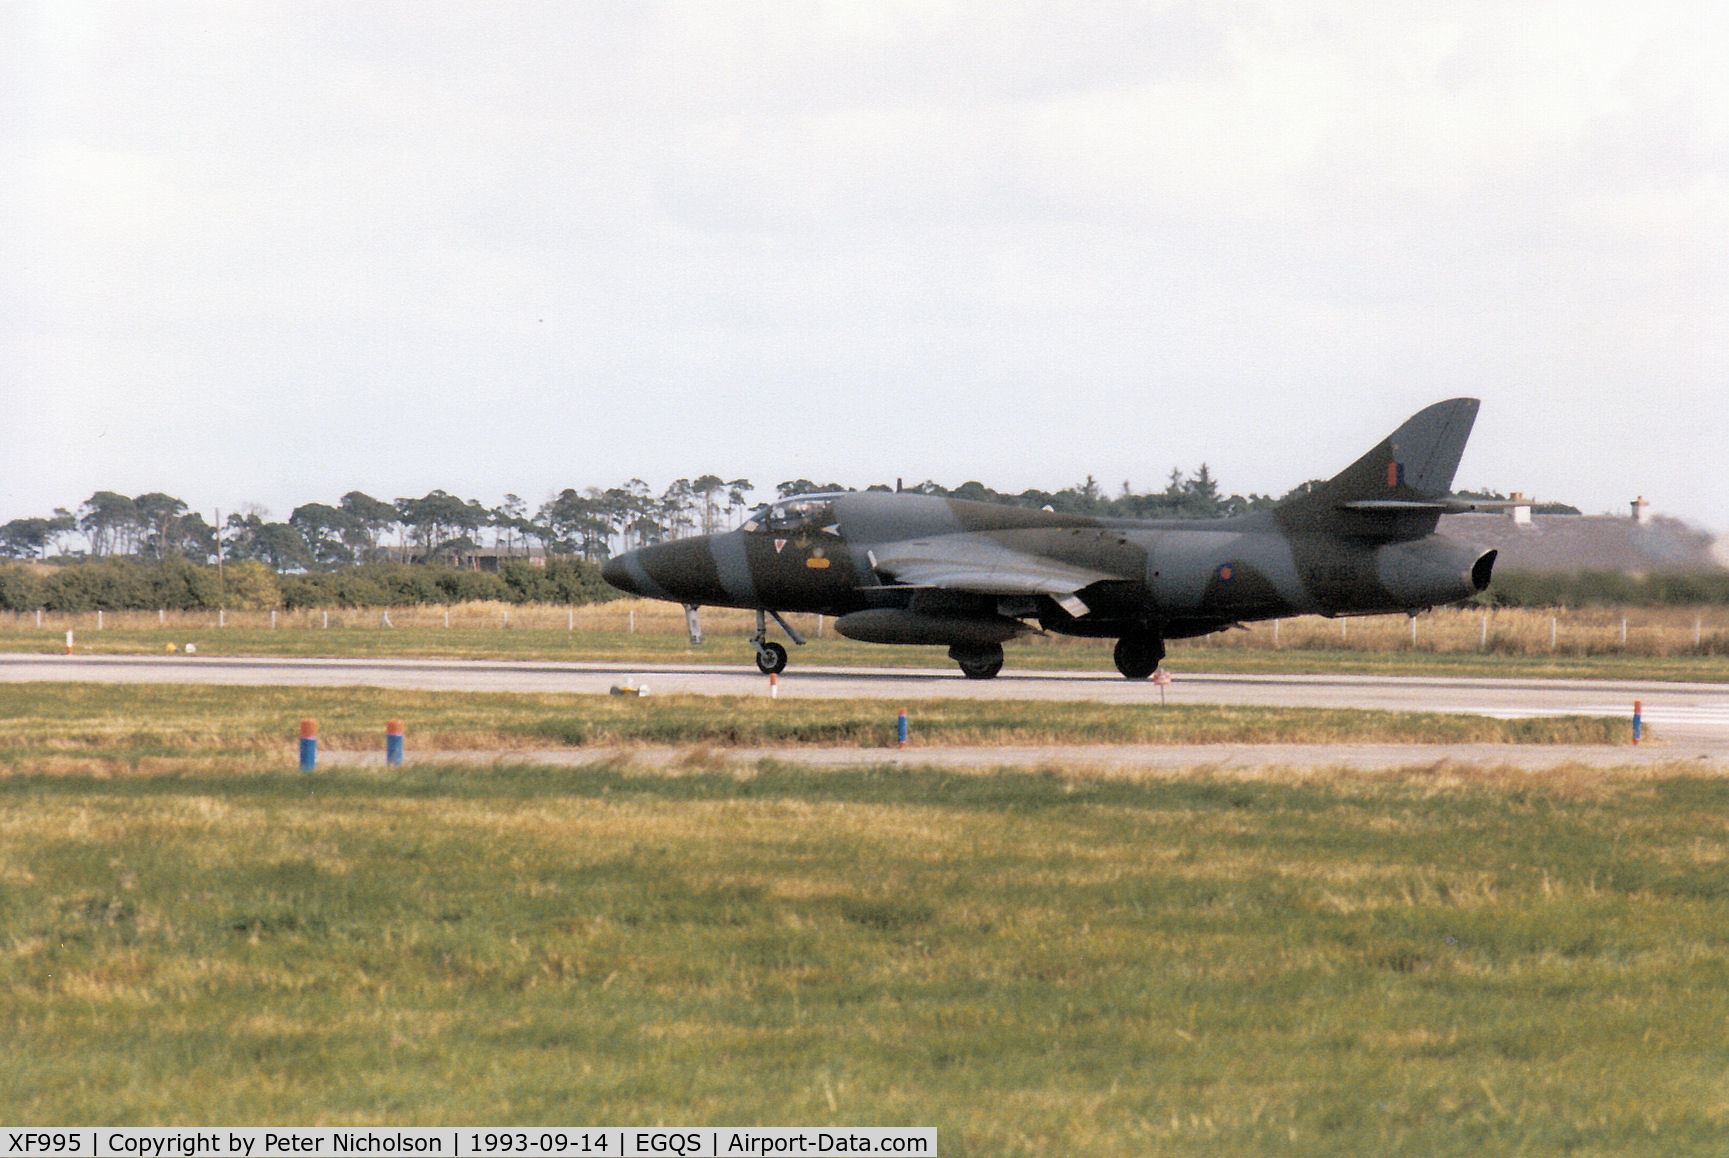 XF995, 1956 Hawker Hunter T.8B C/N HABL-003150, Hunter T.8B of 208 Squadron preparing for take-off on Runway 05 at RAF Lossiemouth in September 1993.